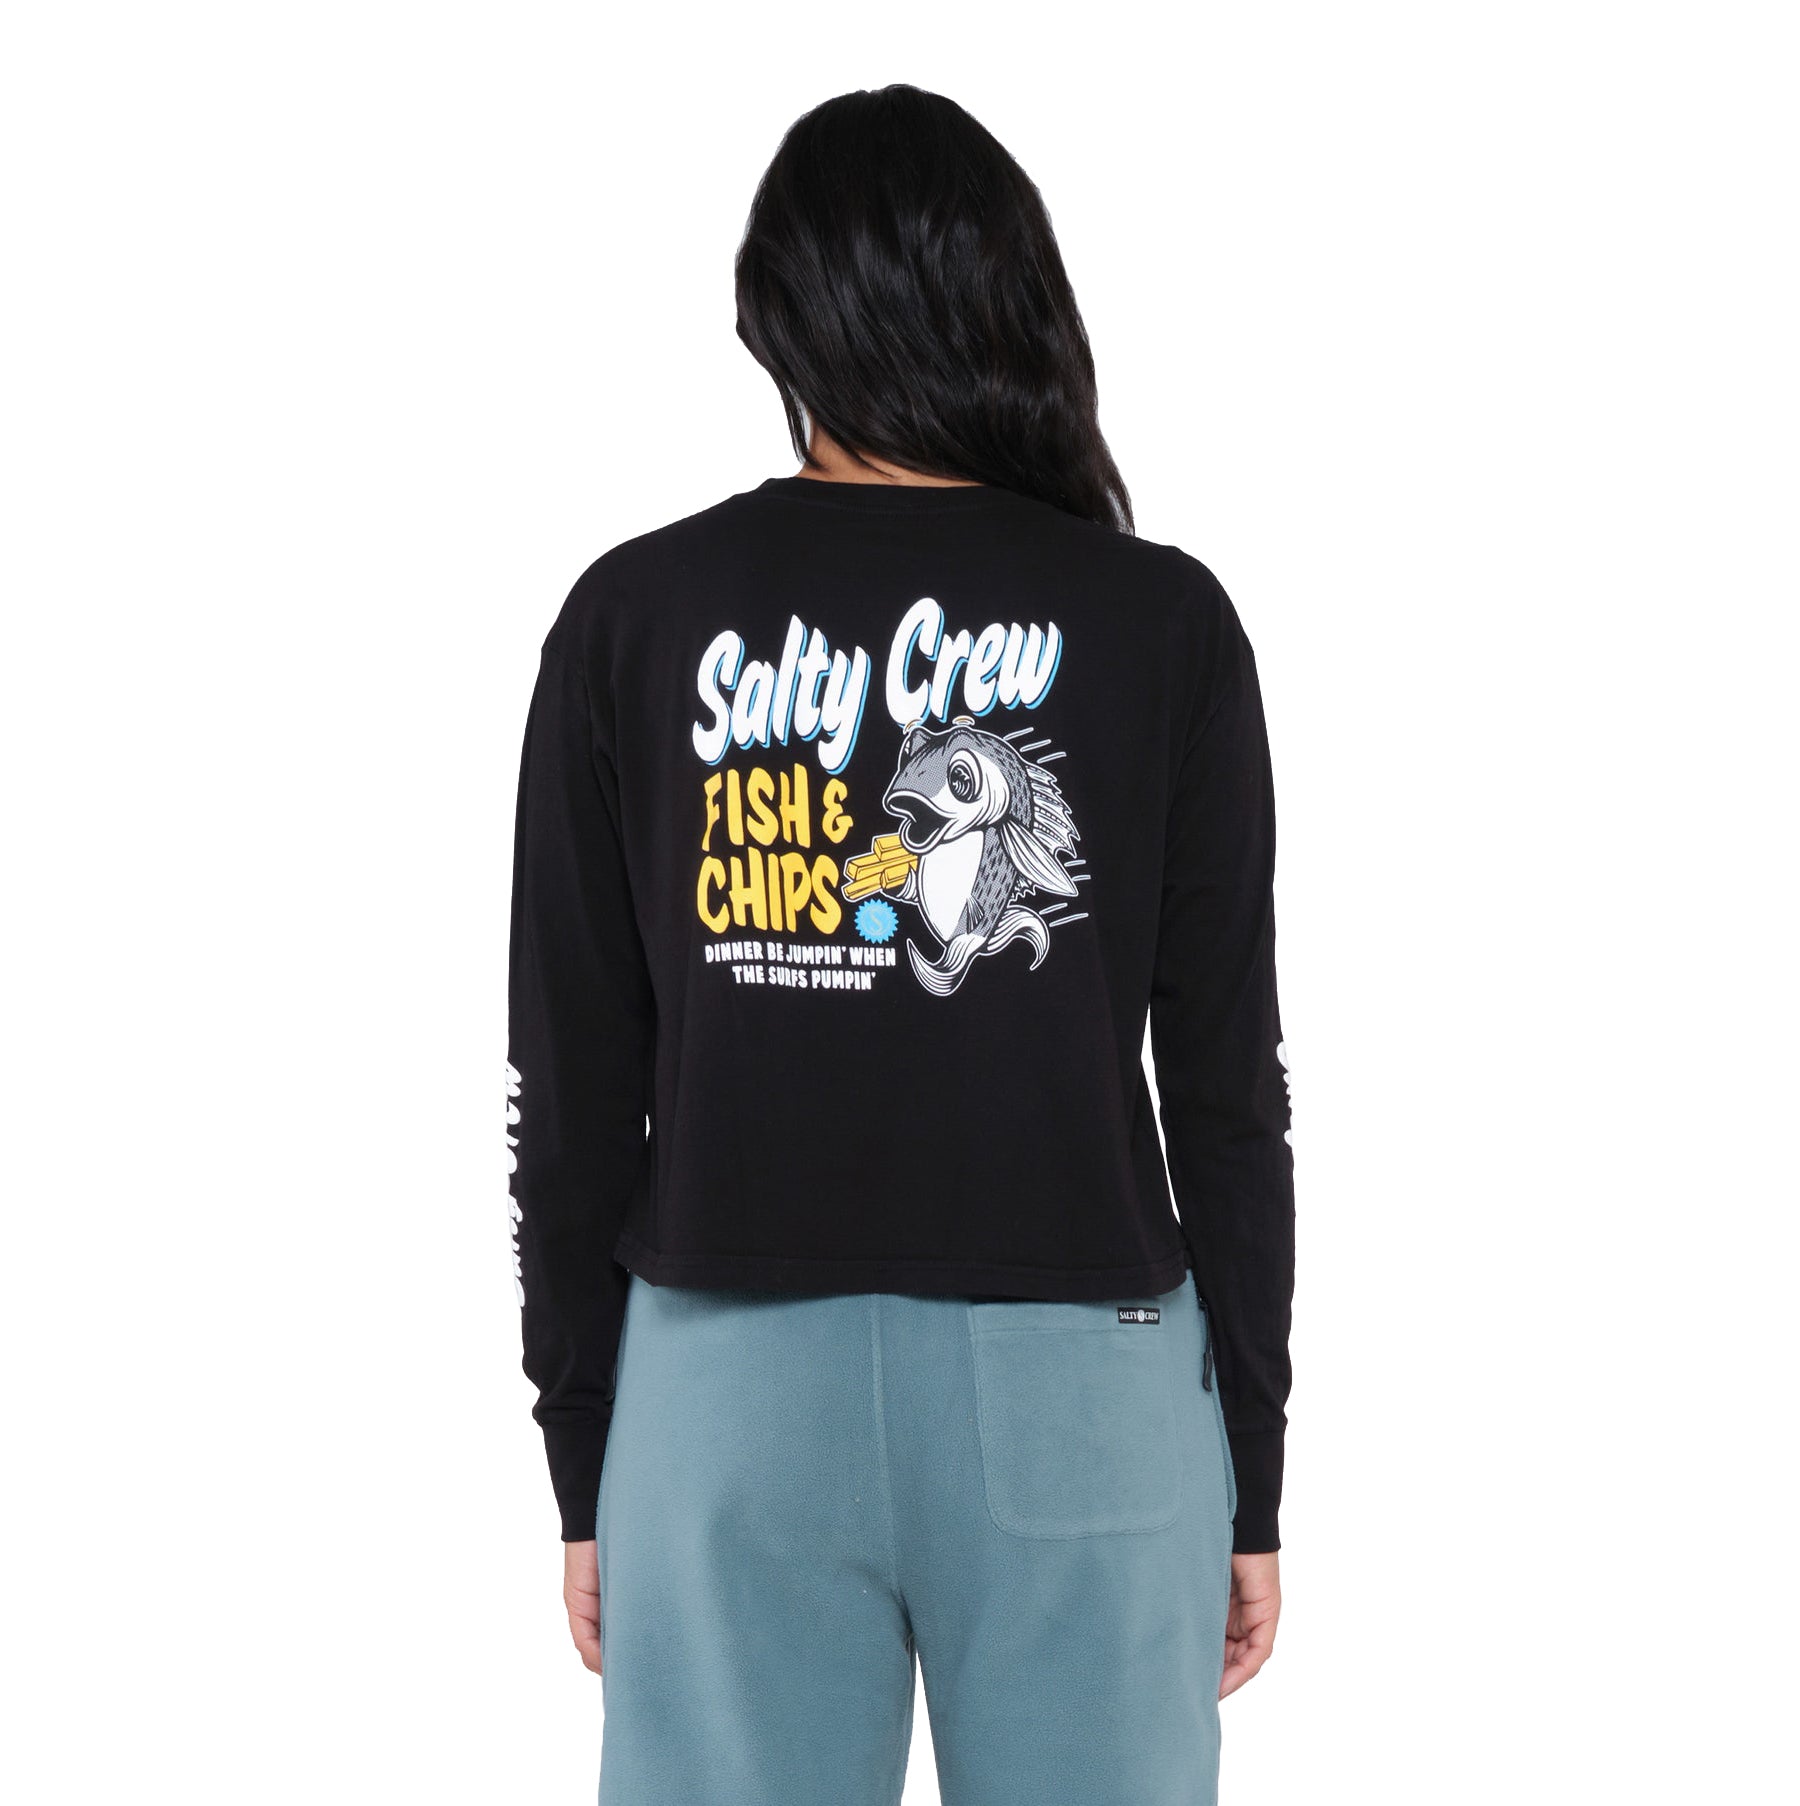 Salty Crew Fish and Chips Crop LS Tee